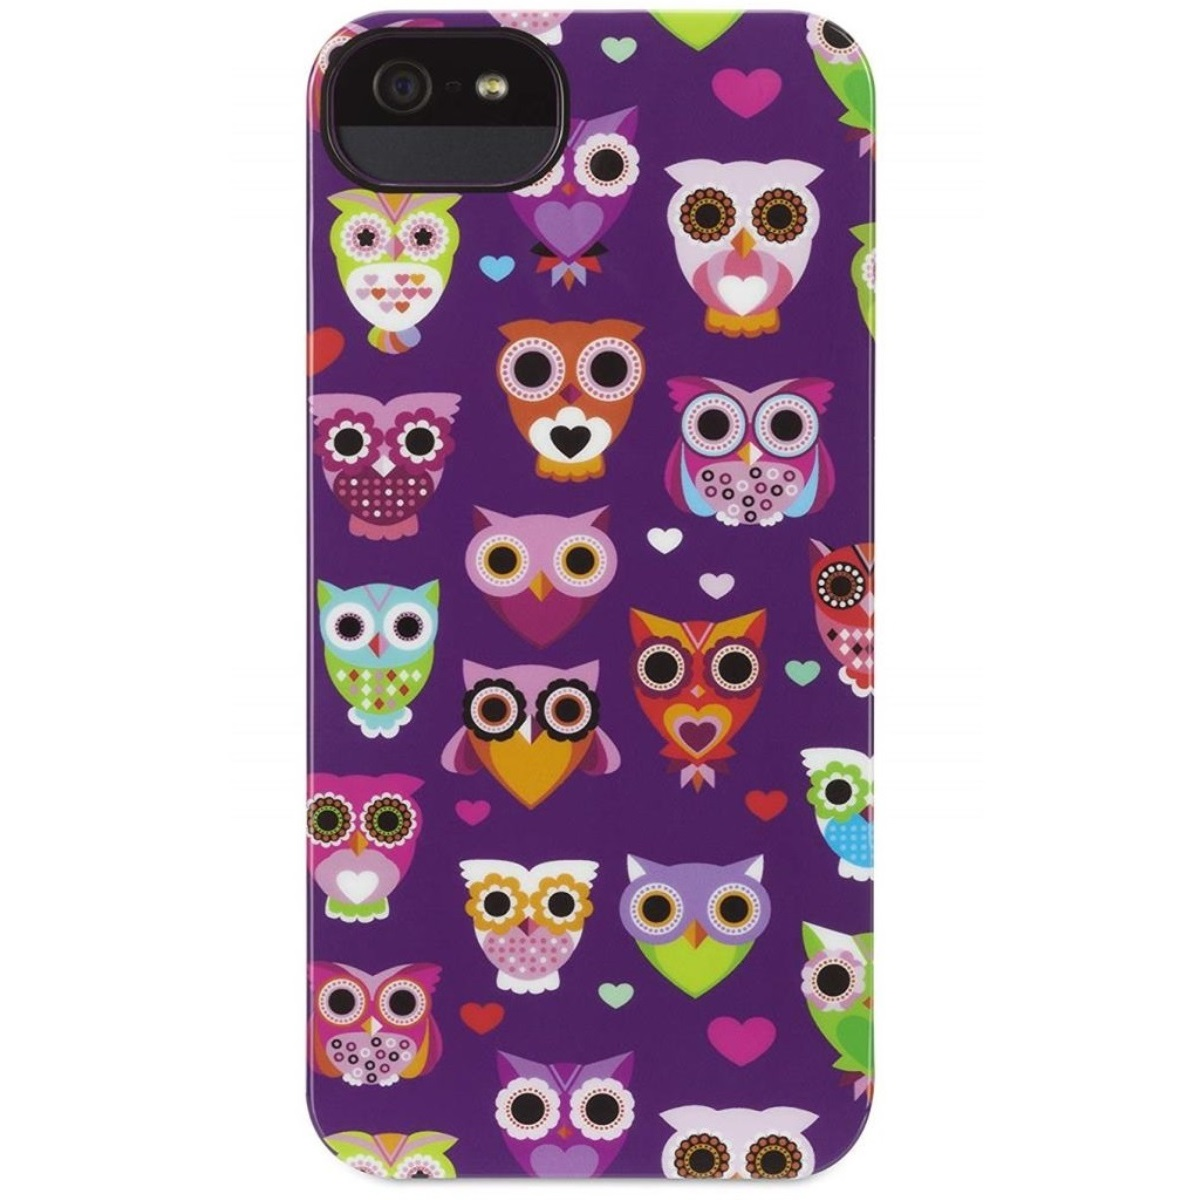 GRIFFIN Wise iPod 5G, Eyes Touch Backcover, Owl, Apple, Lila